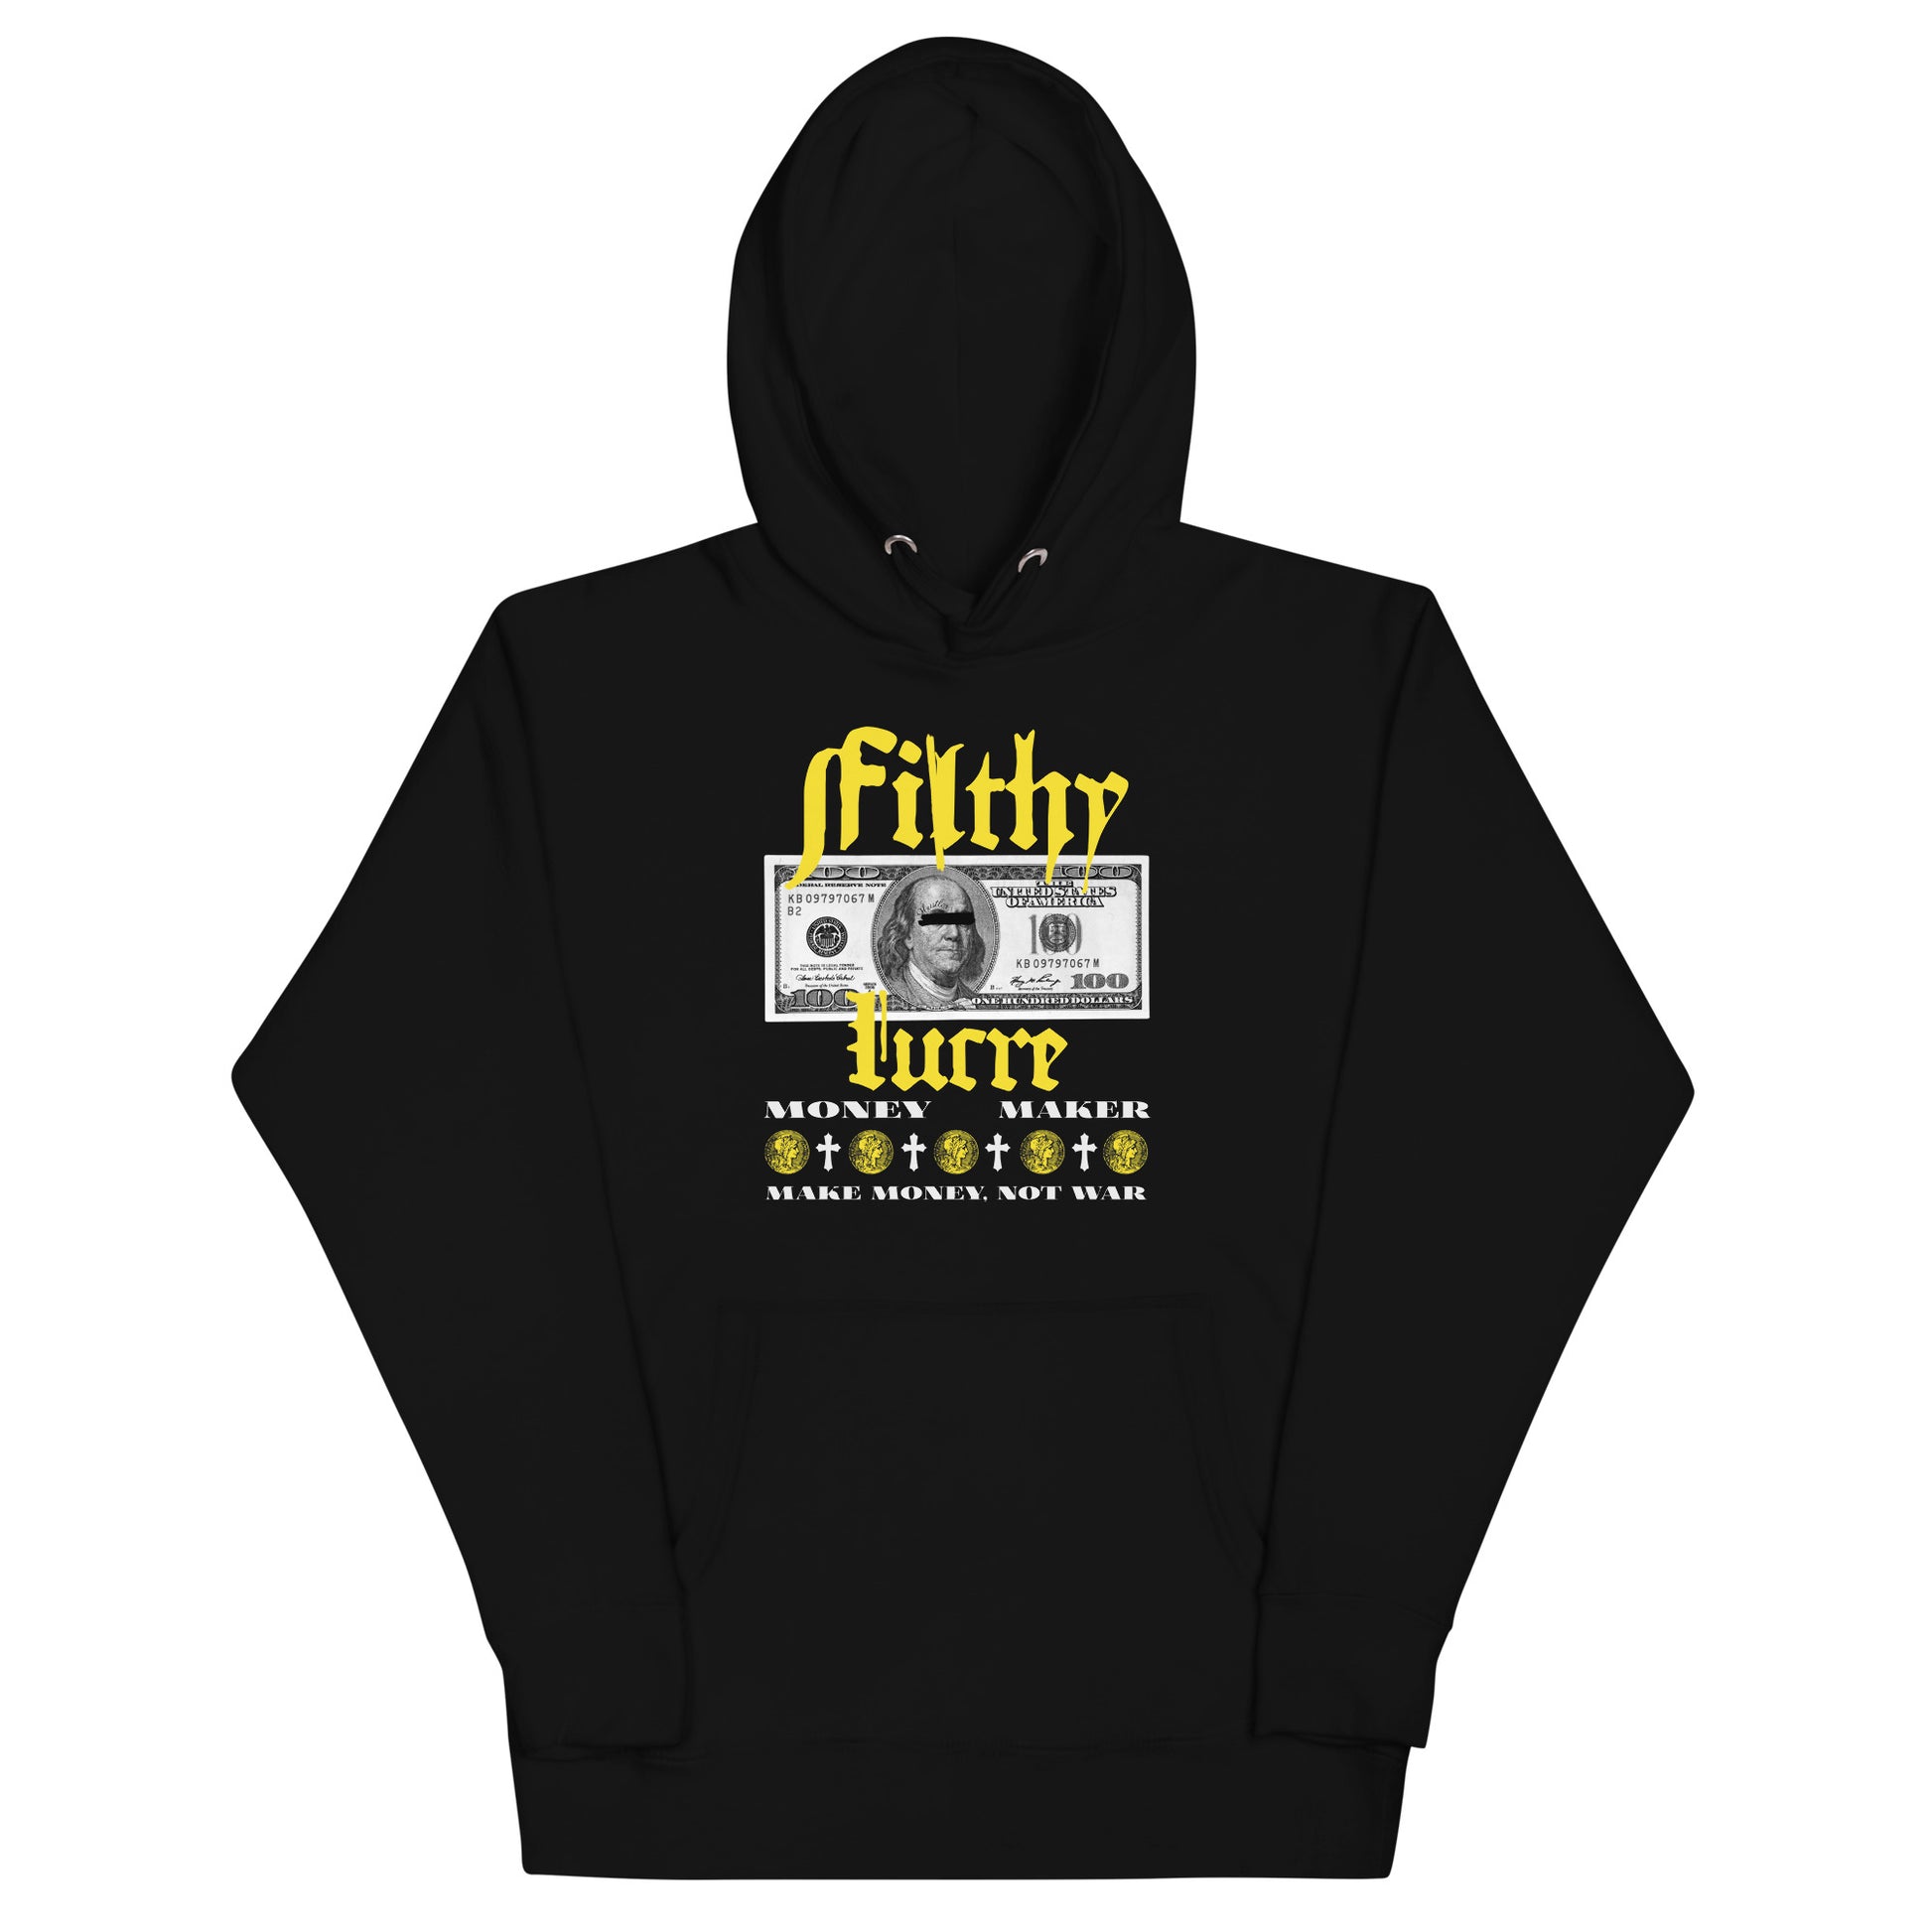 Filthy Lucre Unisex Hoodie - GFTD MNDS